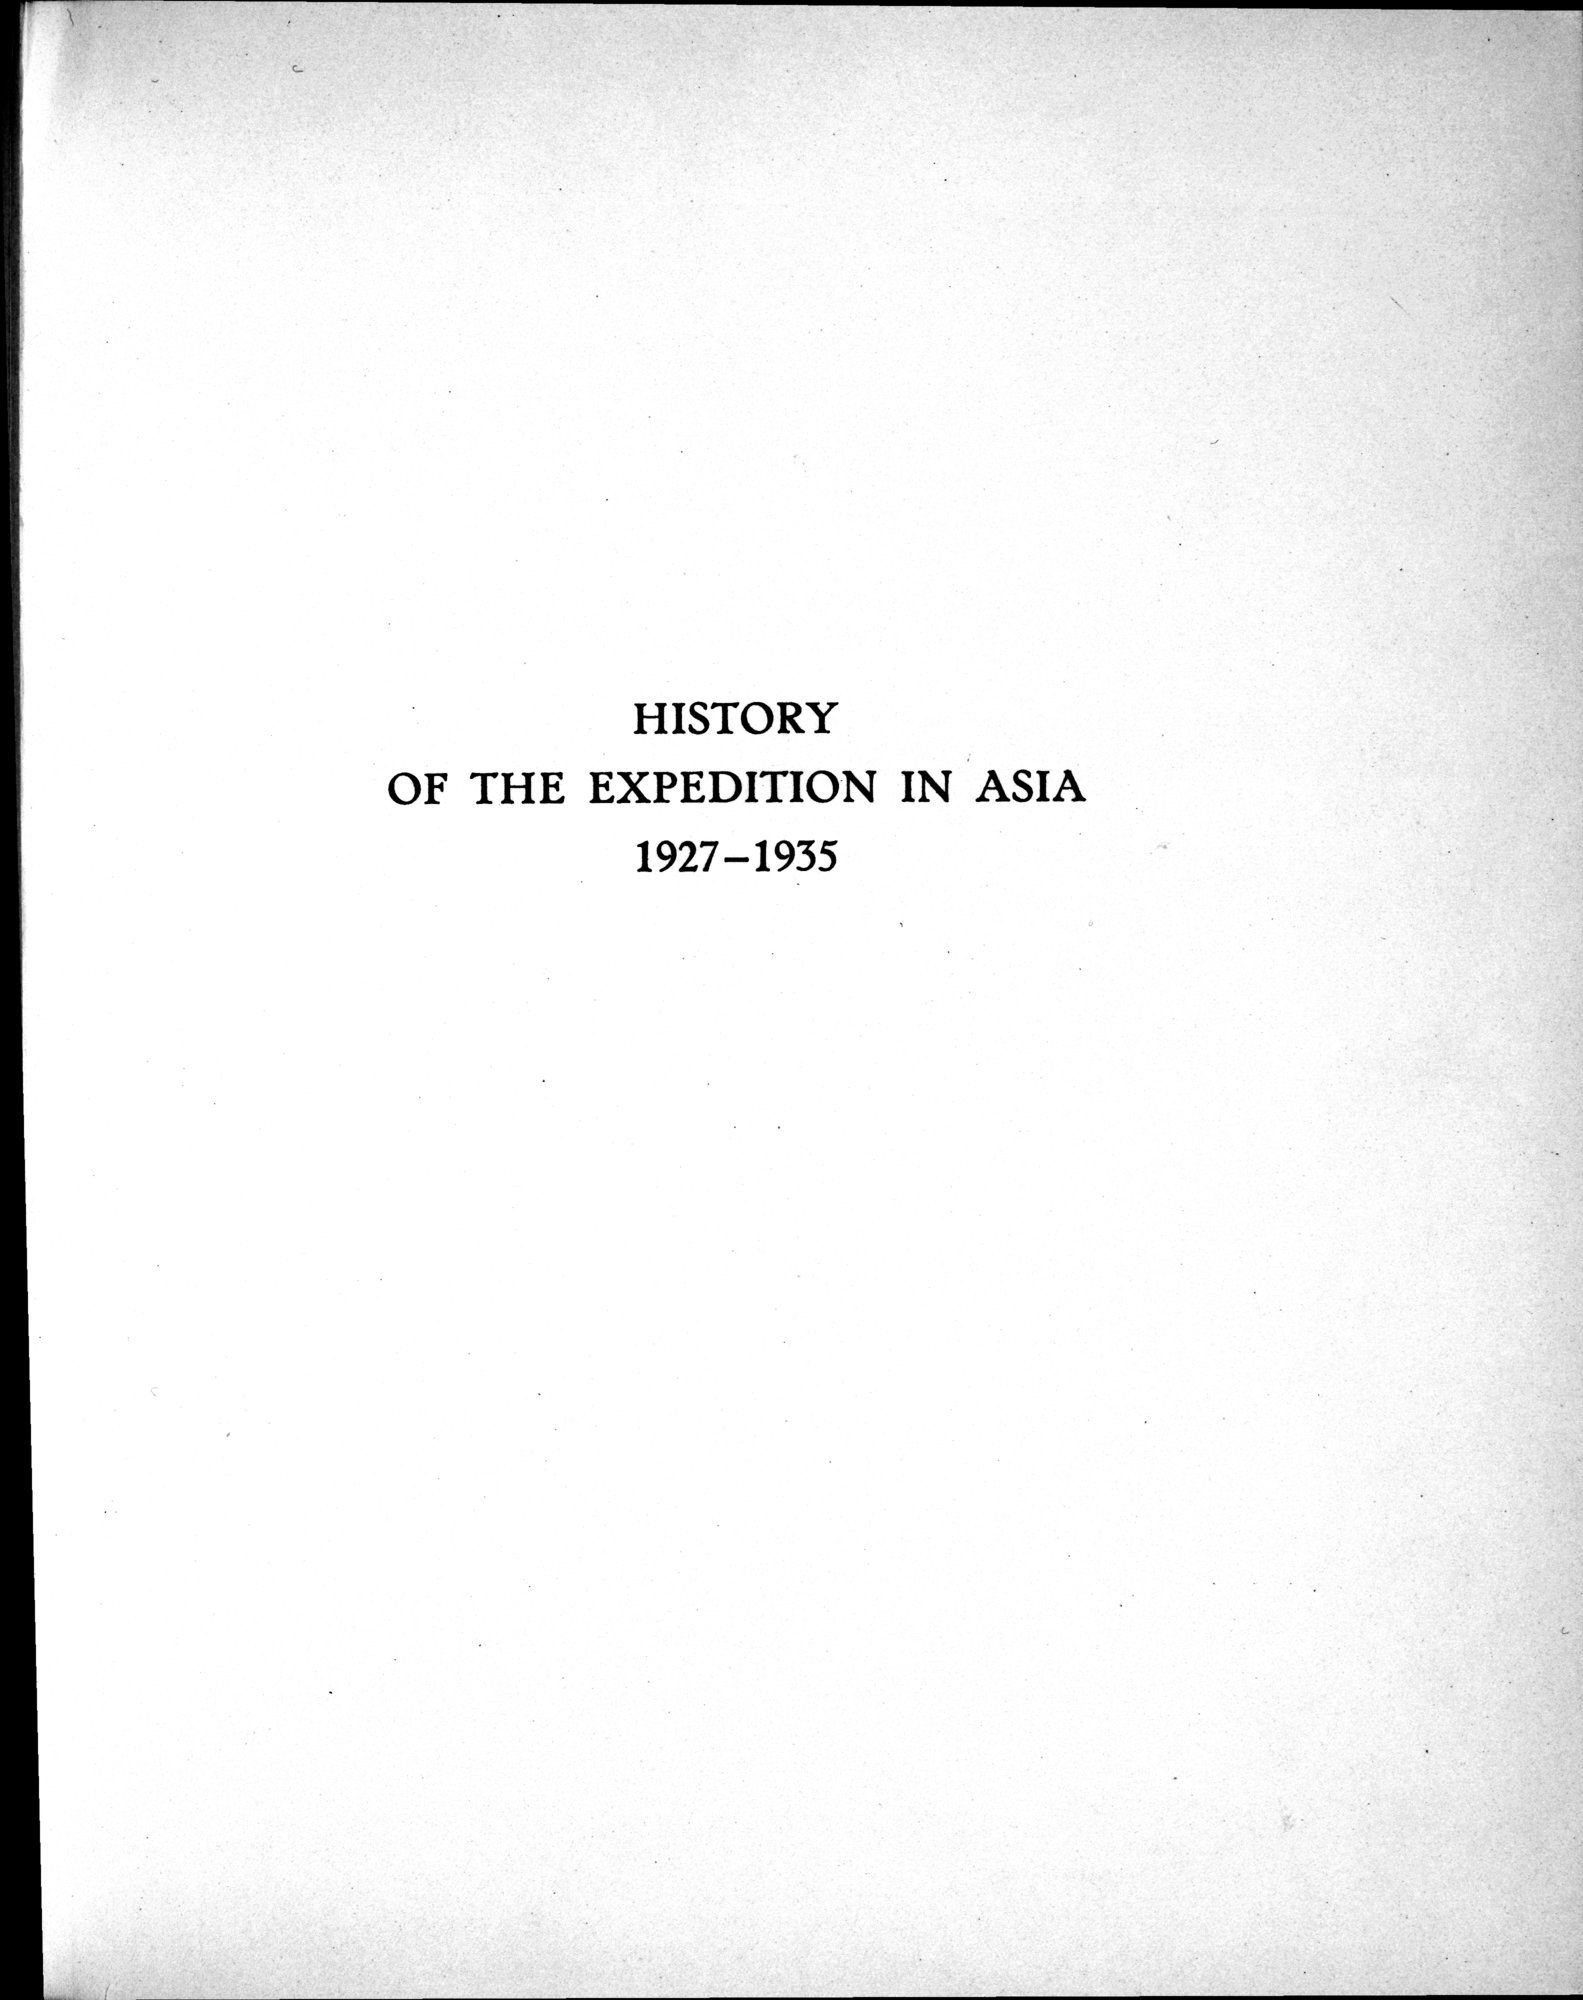 History of the expedition in Asia, 1927-1935 : vol.1 / 9 ページ（白黒高解像度画像）